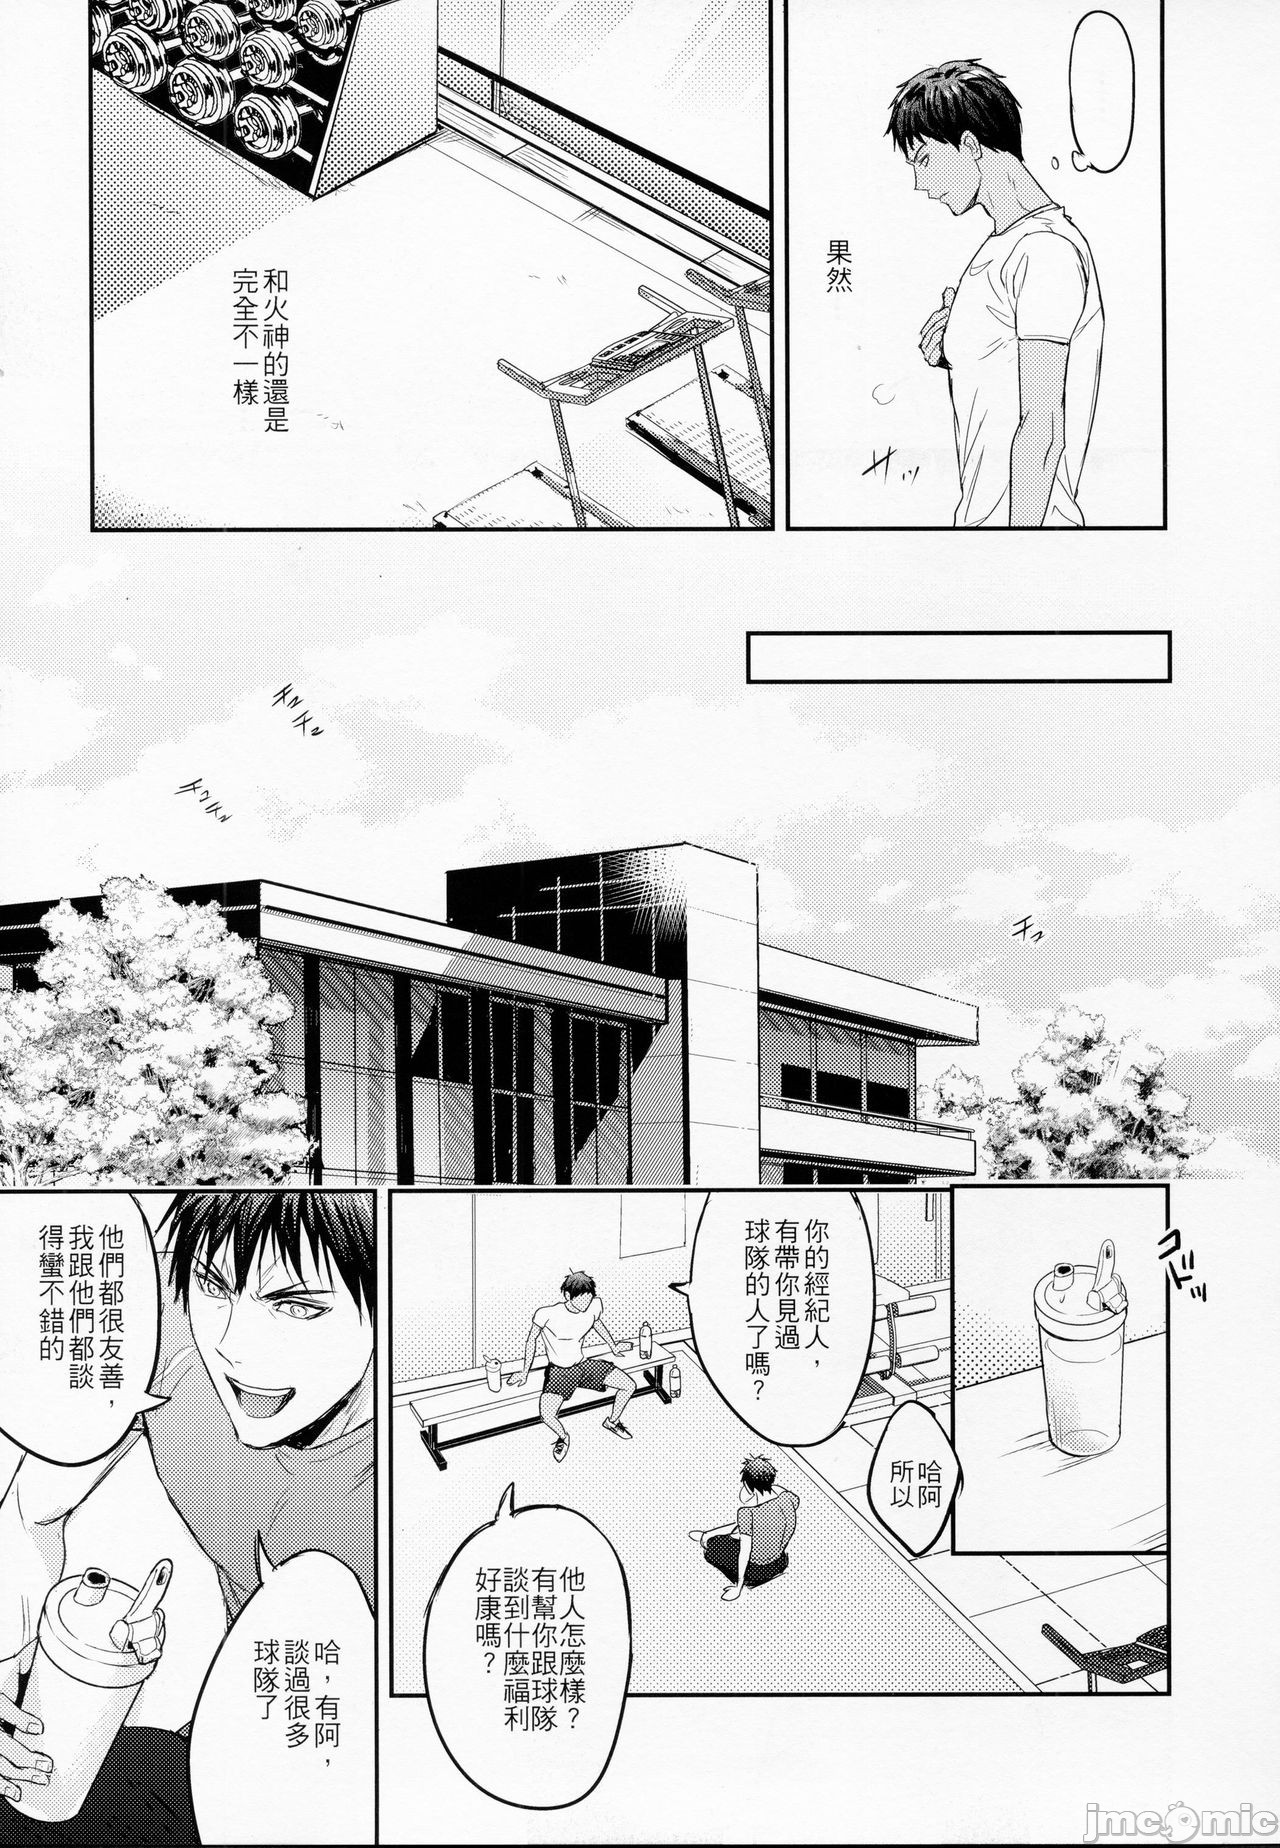 【This is how we WORK IT OUT (黒子のバスケ)[腐漫]】漫画-（第1话）章节漫画下拉式图片-6.jpg